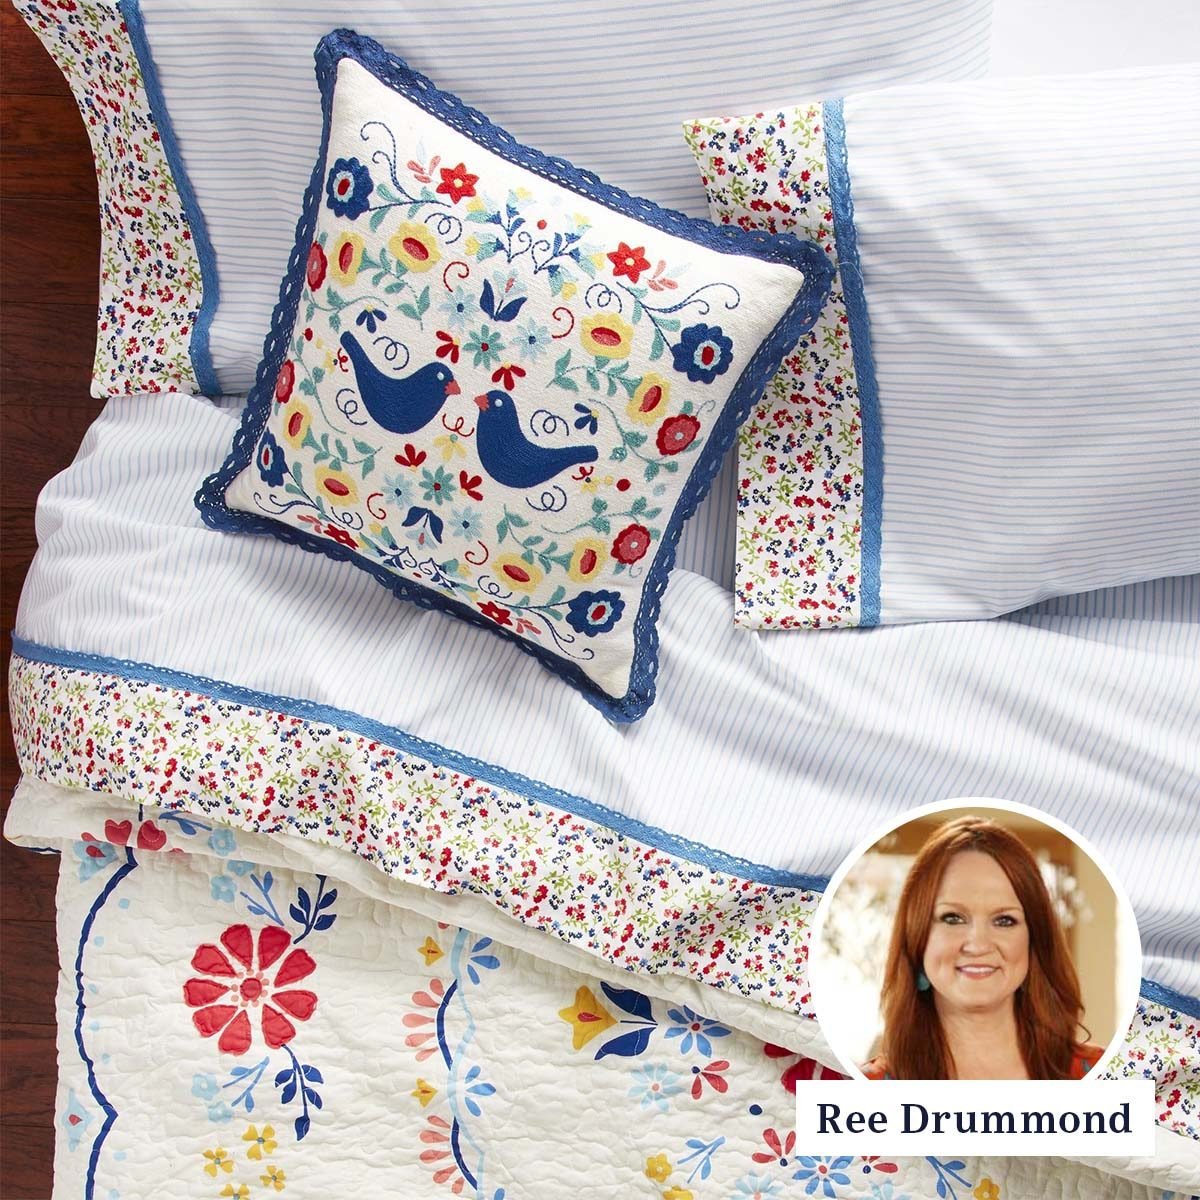 https://www.tasteofhome.com/wp-content/uploads/2022/03/Ree-drummond-the-pioneer-woman-home-goods-feature.jpg